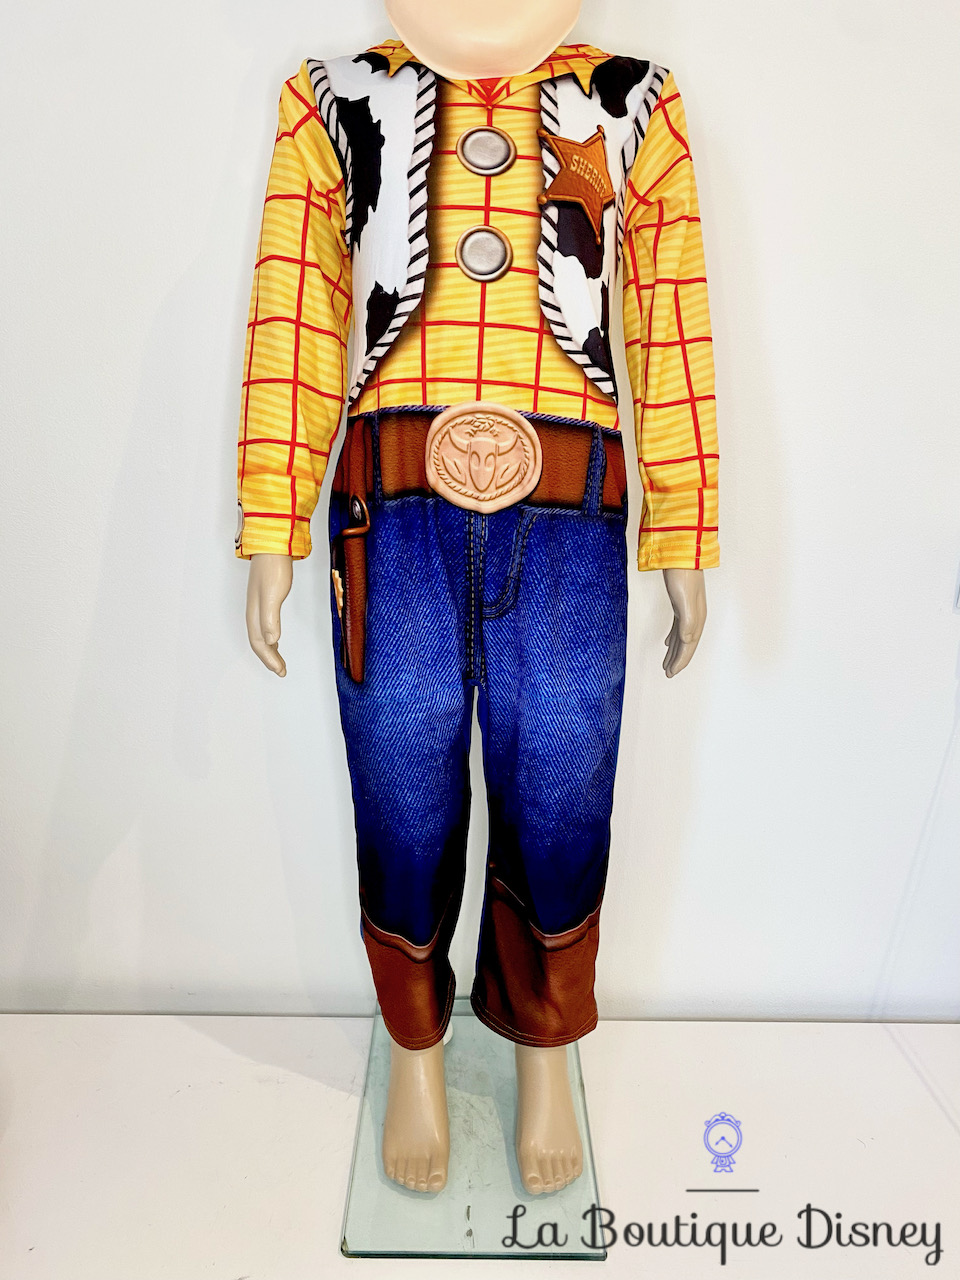 déguisement-woody-toy-story-disney-rubies-taille-3-4-ans-cow-boy-masque-10